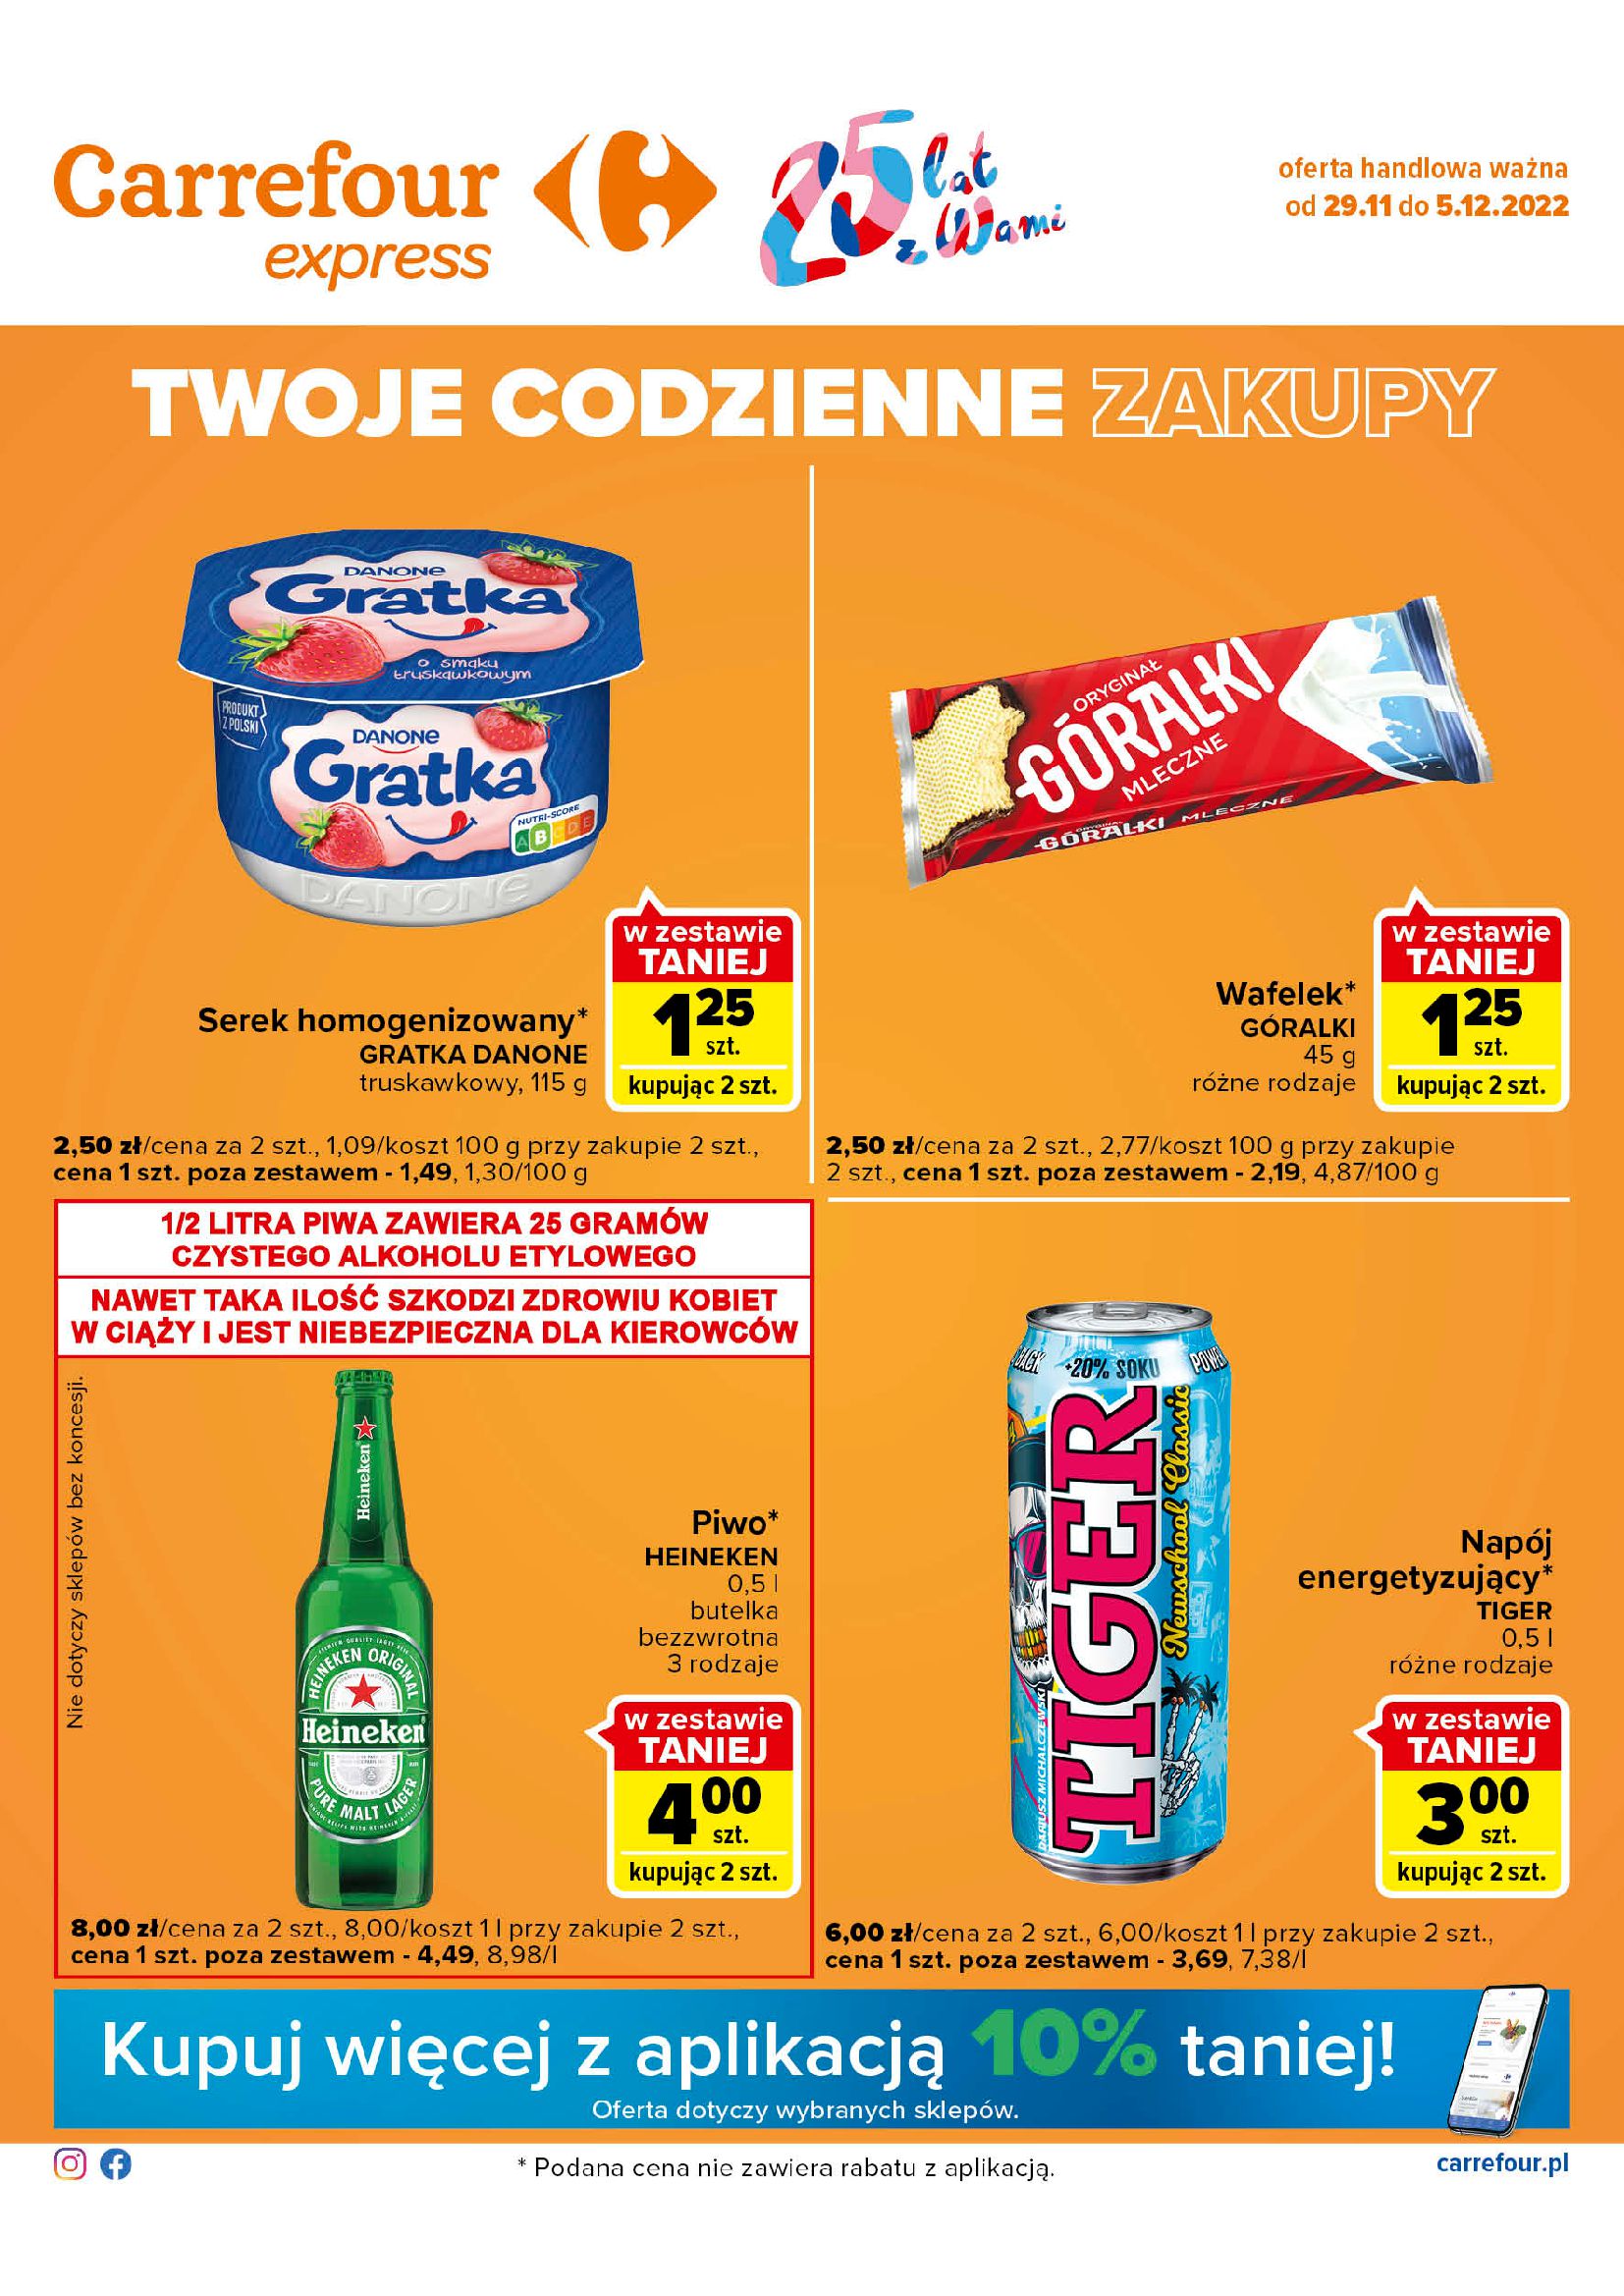 Gazetka Carrefour Express: Gazetka Carrefour Express do 5.12. 2022-11-29 page-1